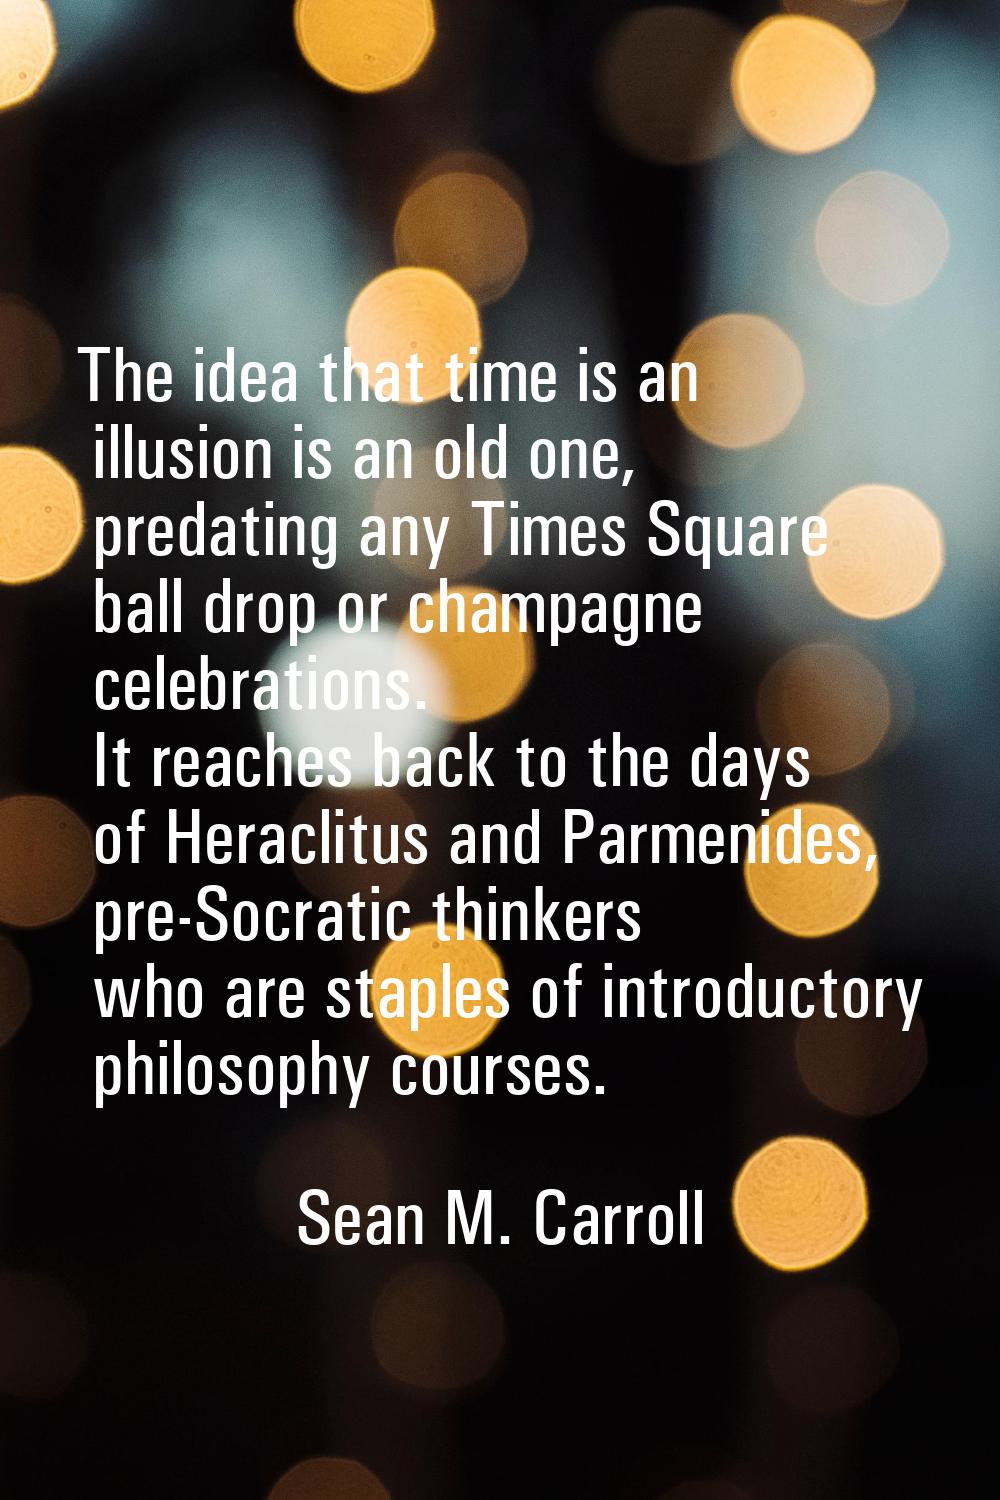 The idea that time is an illusion is an old one, predating any Times Square ball drop or champagne 